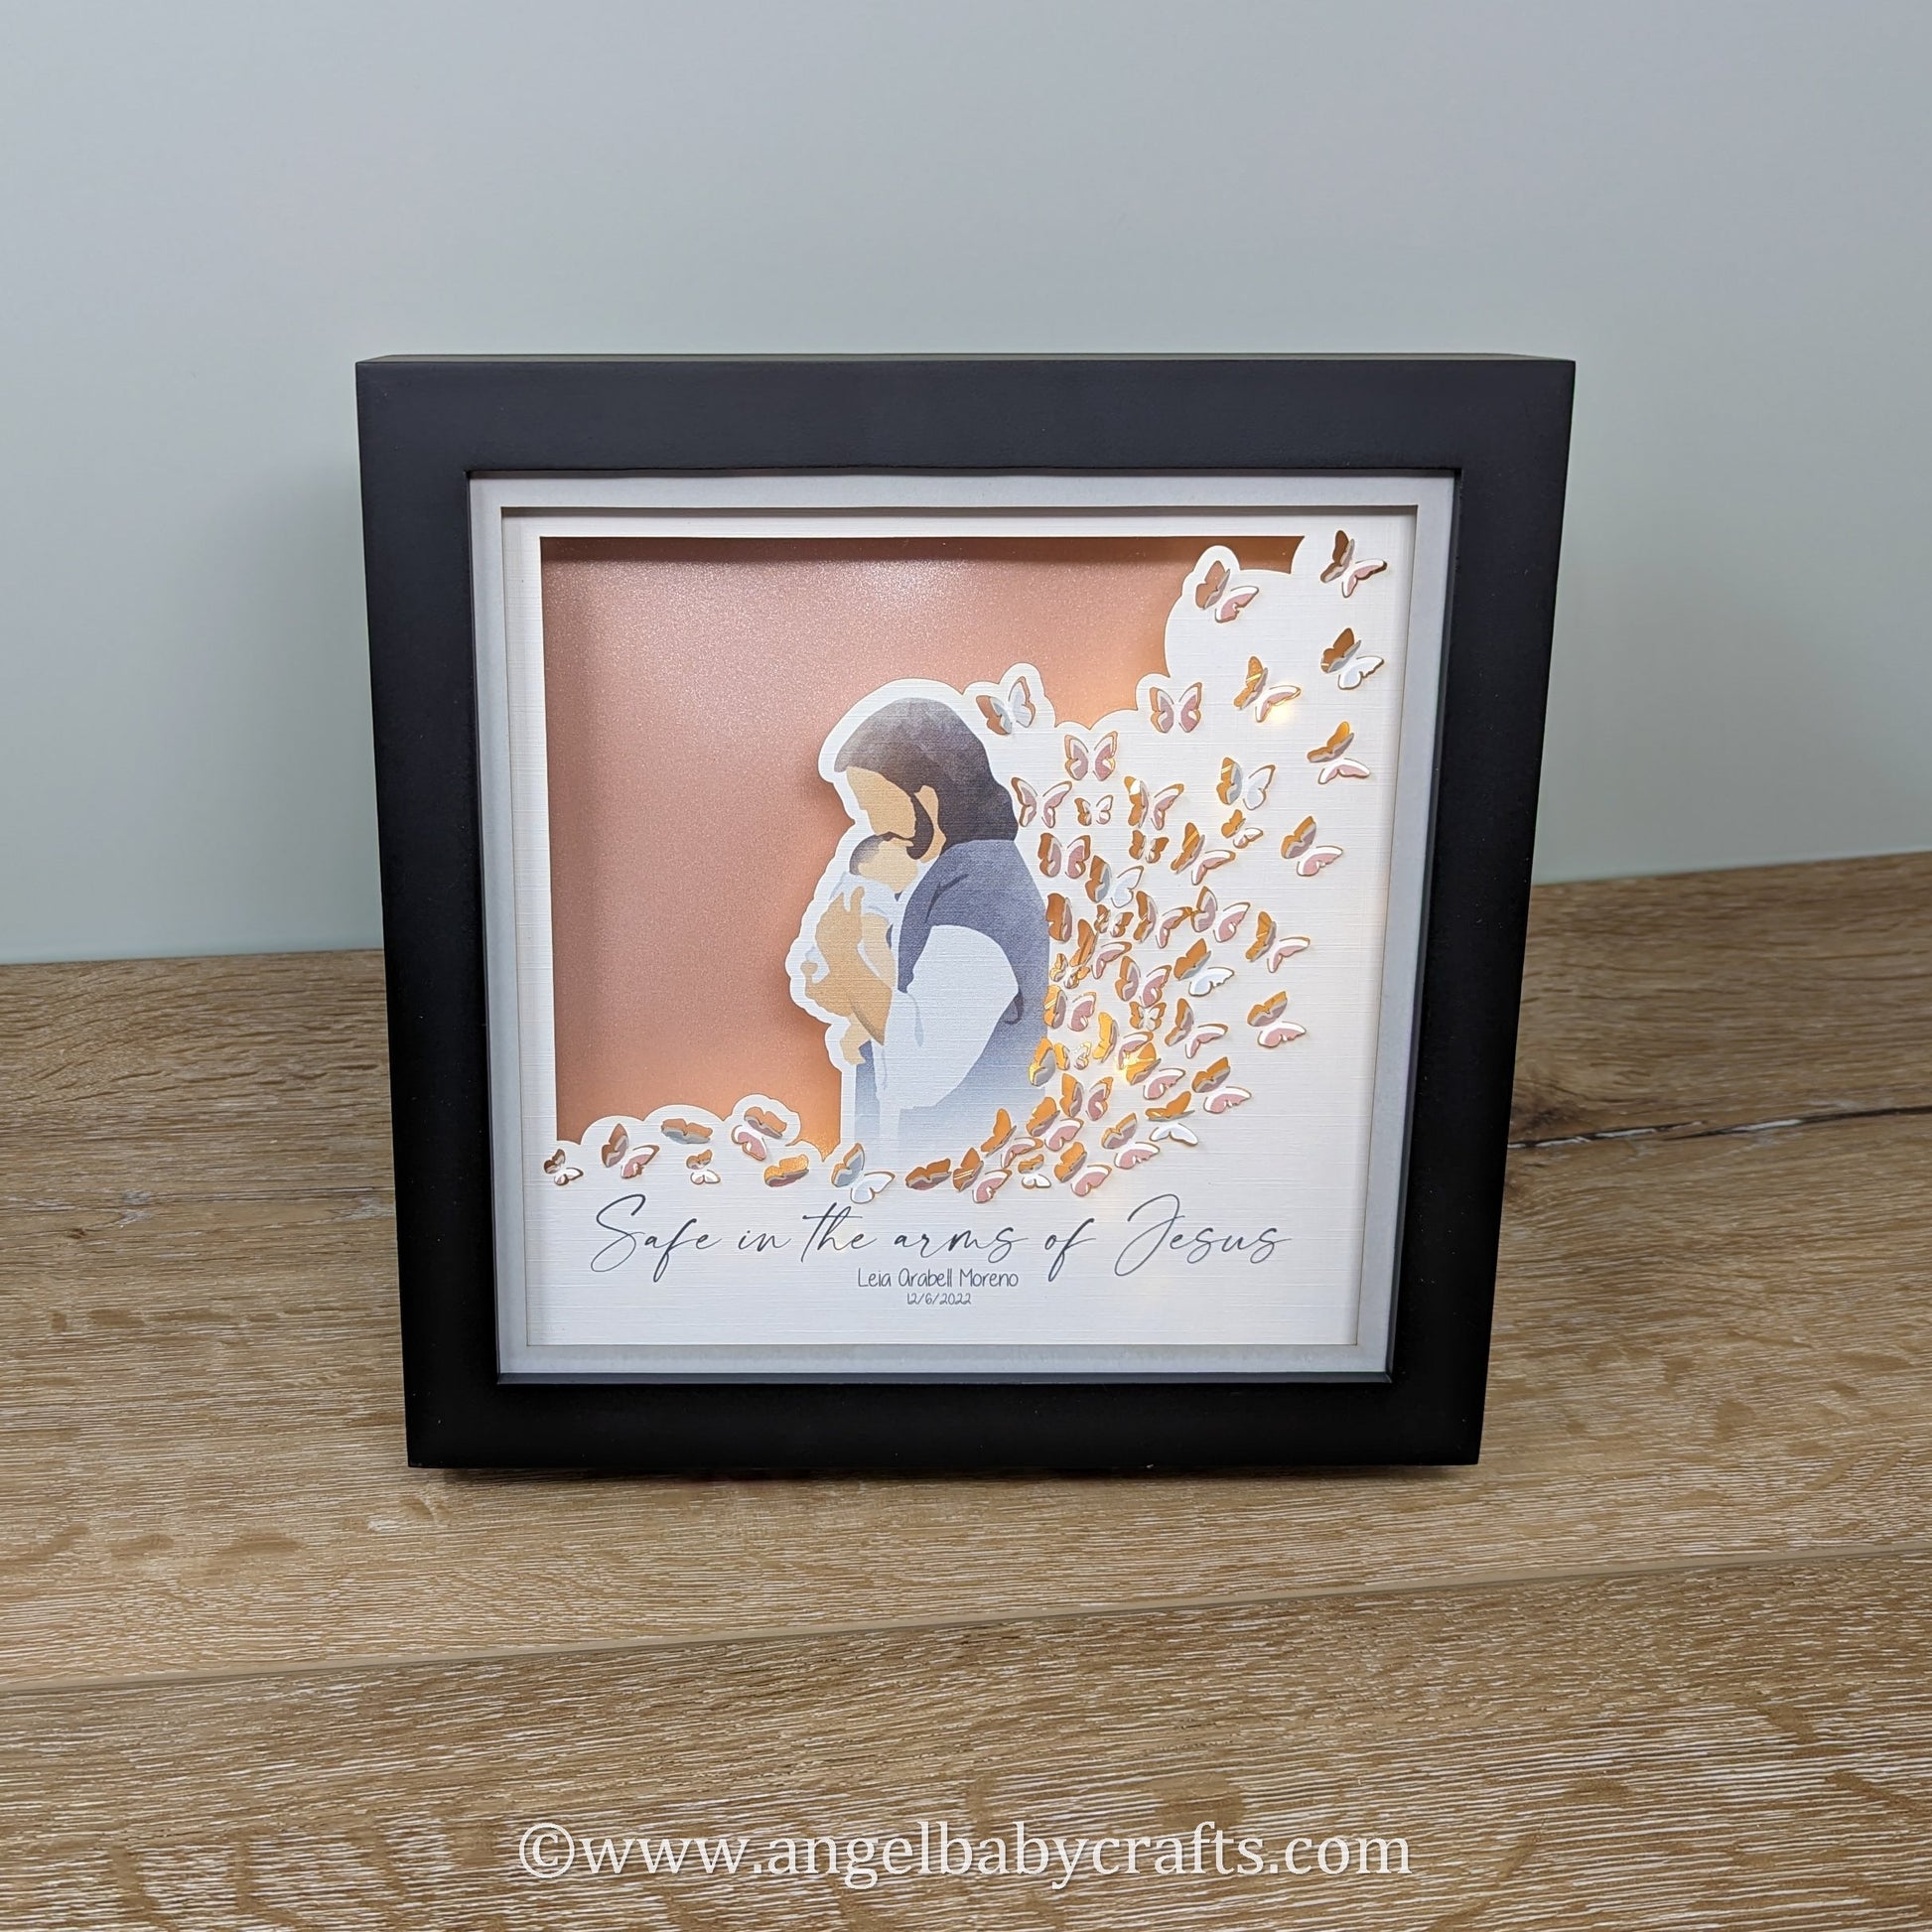 Jesus Holding a Baby Framed With 3D Butterflies and Lighting Memorial Miscarriage Gift, Stillborn Gift, Loss of a Child Gift Keepsake